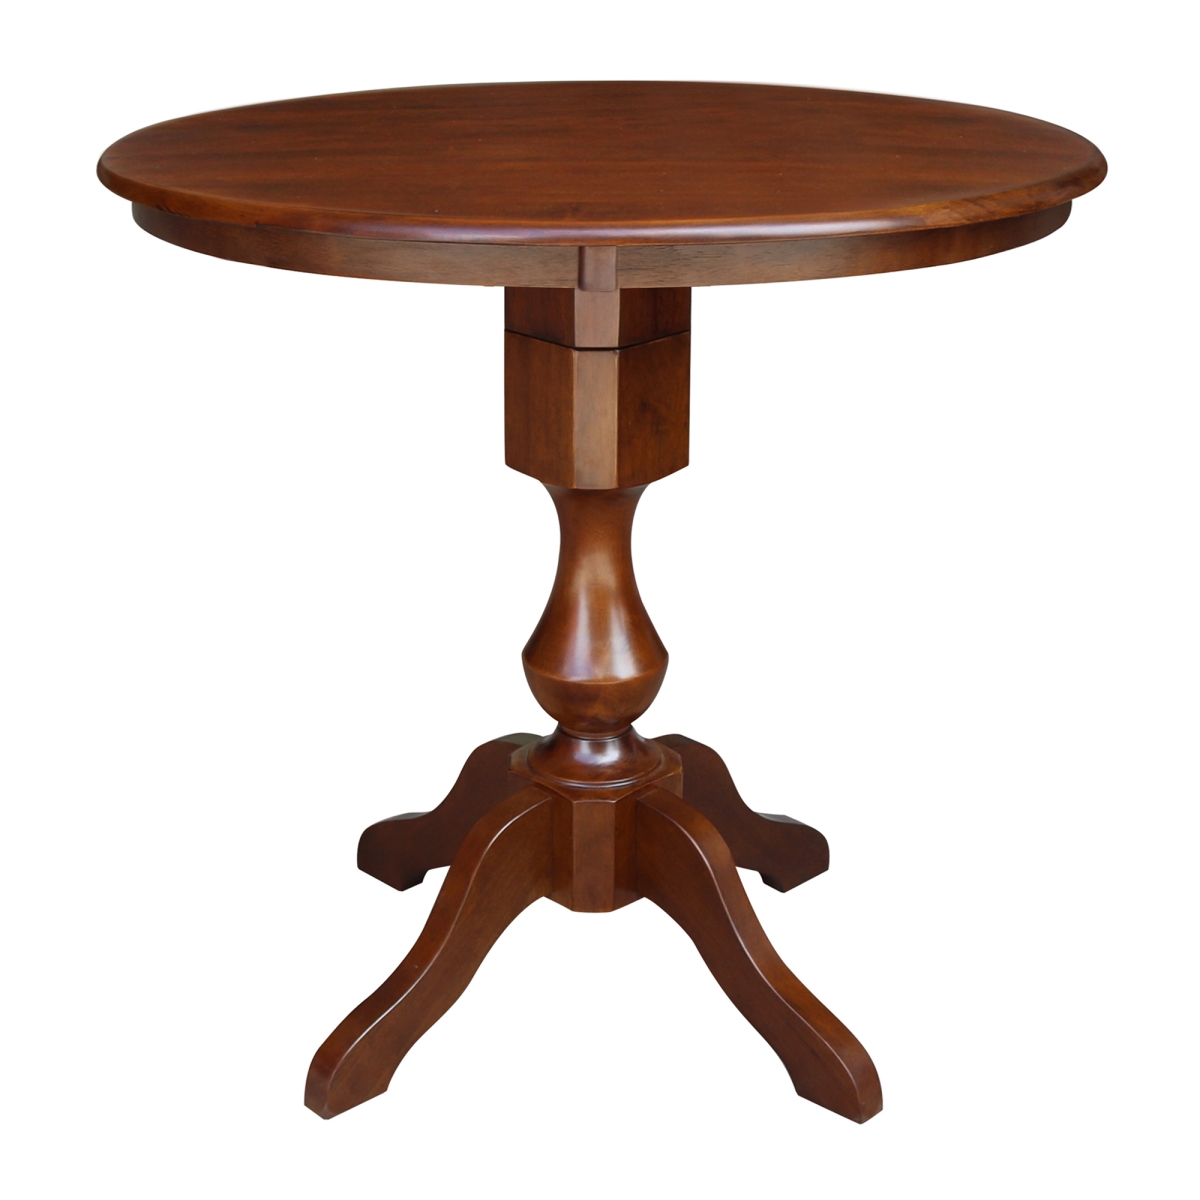 K581-36rt-11p 34.9 X 36 In. Round Top Pedestal Counter Table - Espresso